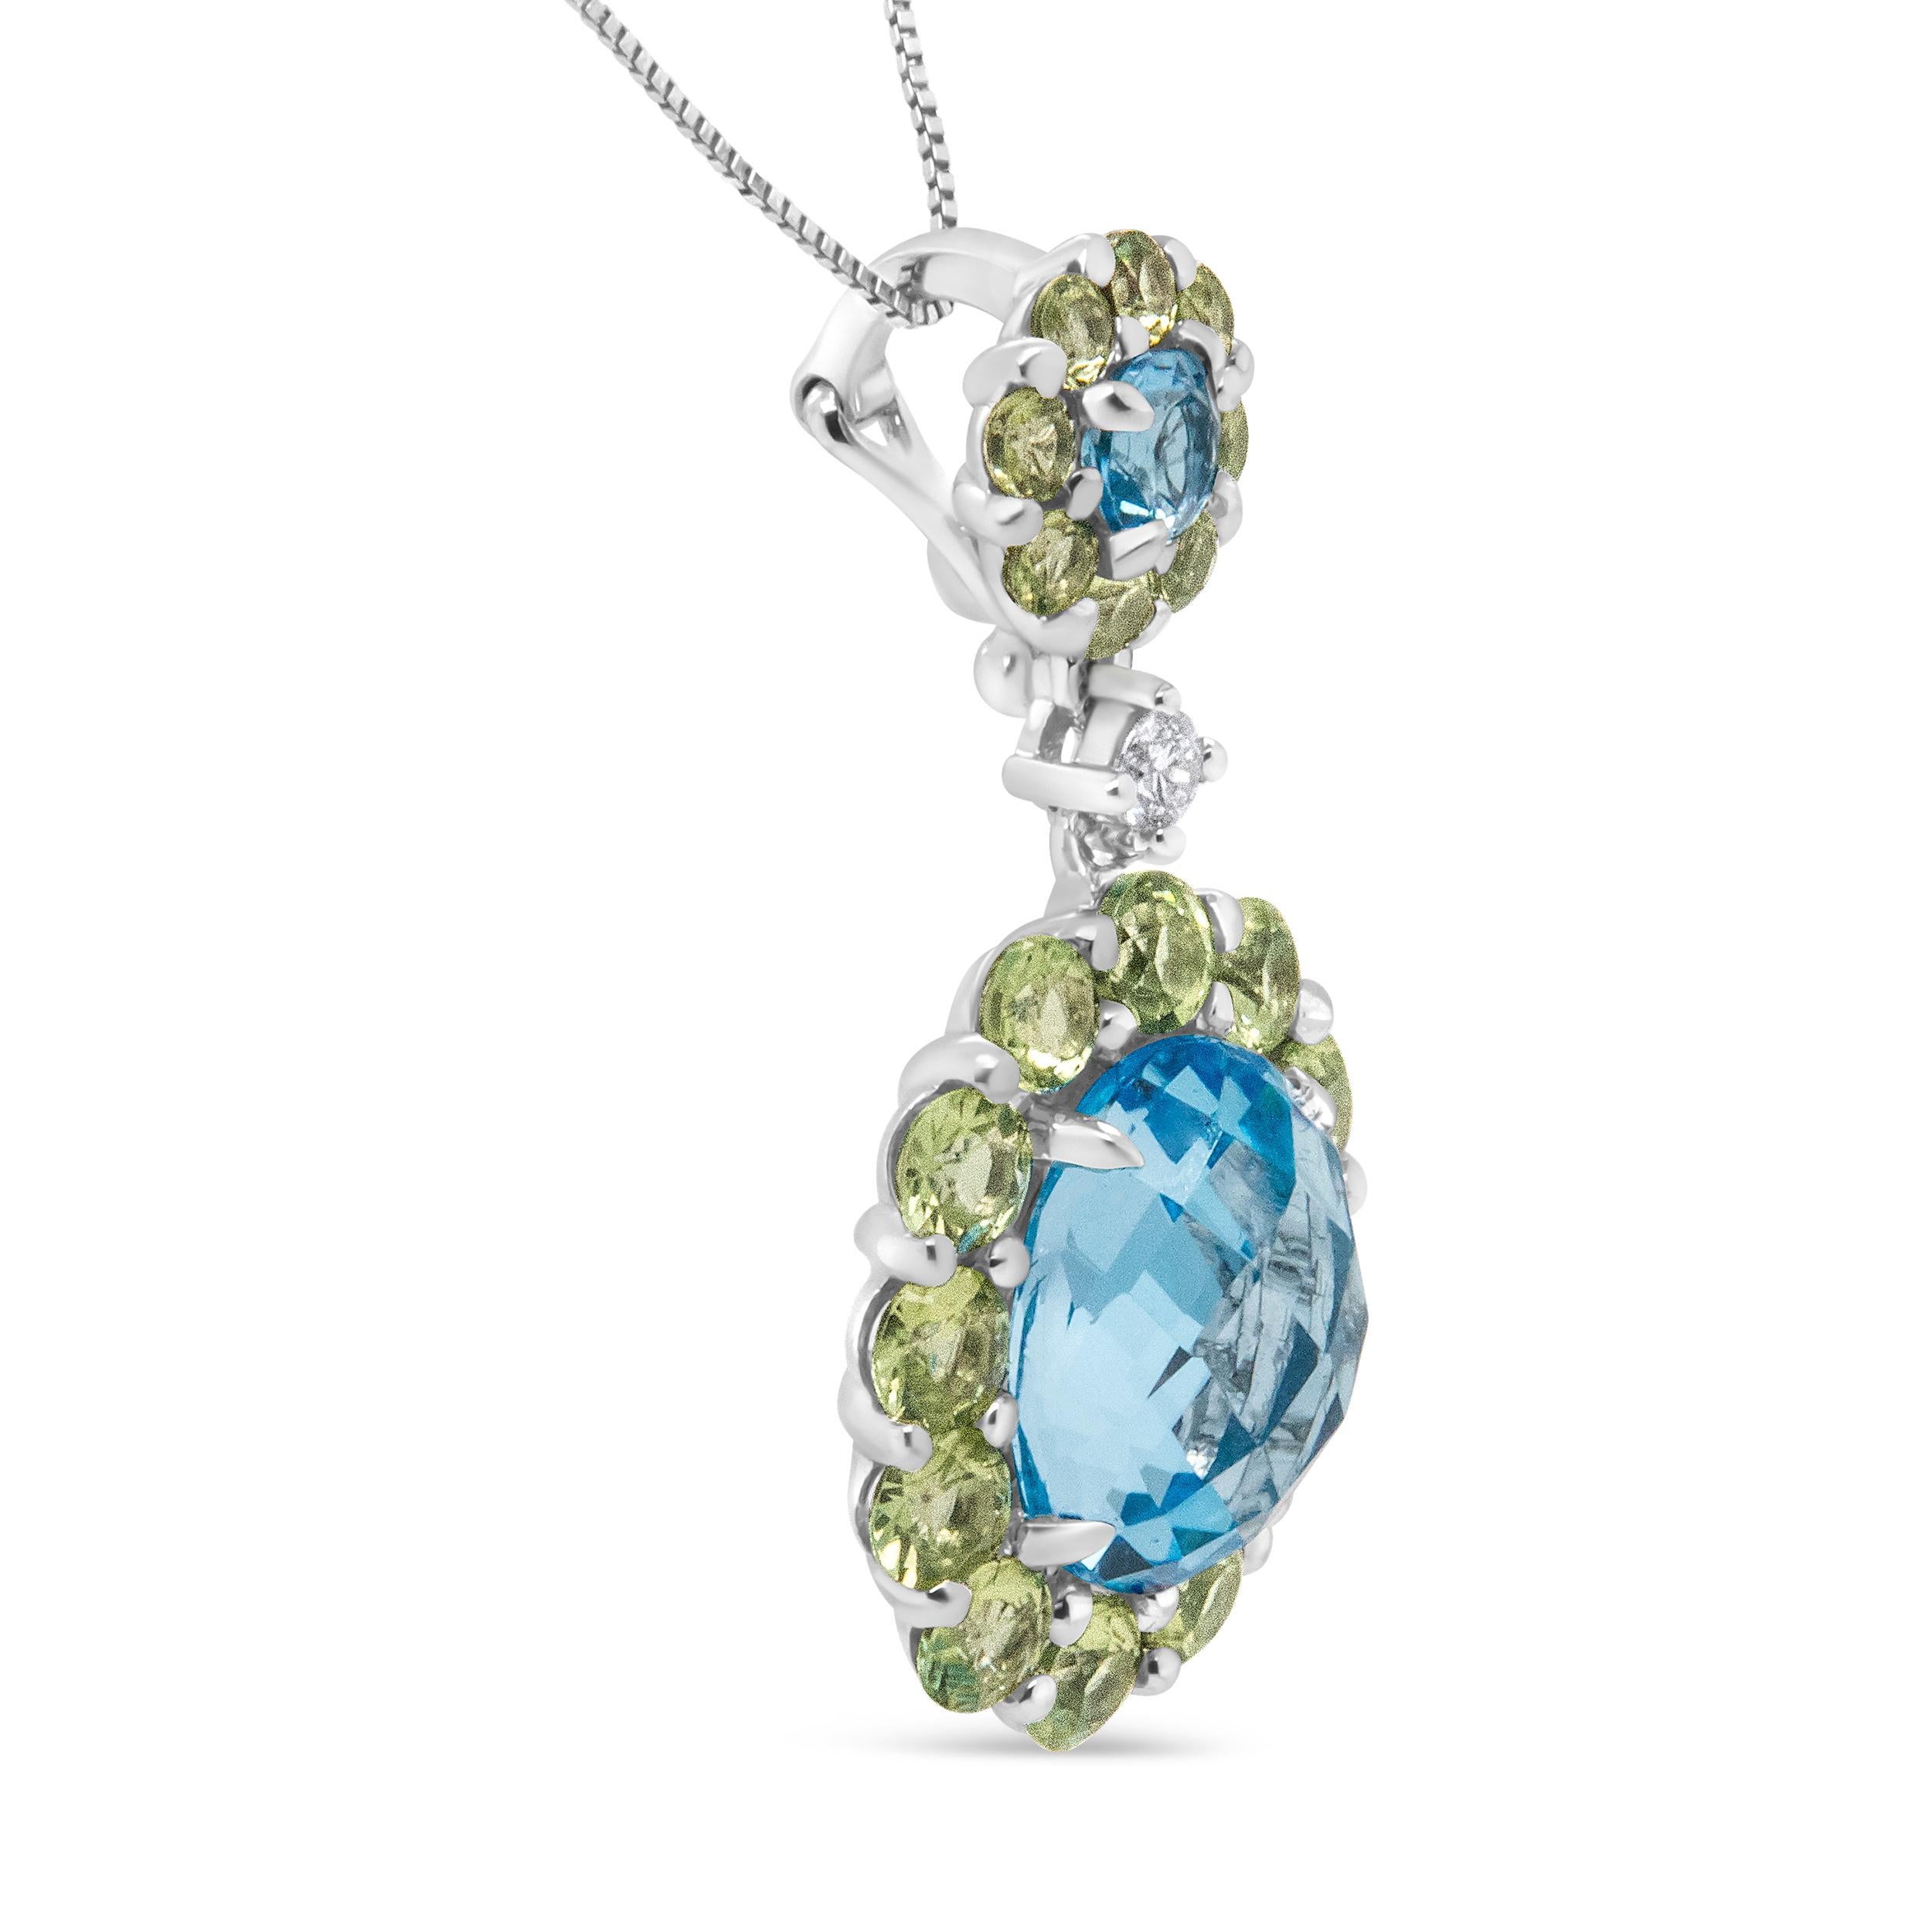 Contemporary 18K White Gold 0.05 Ct Diamond and Blue Topaz and Green Peridot Pendant Necklace For Sale